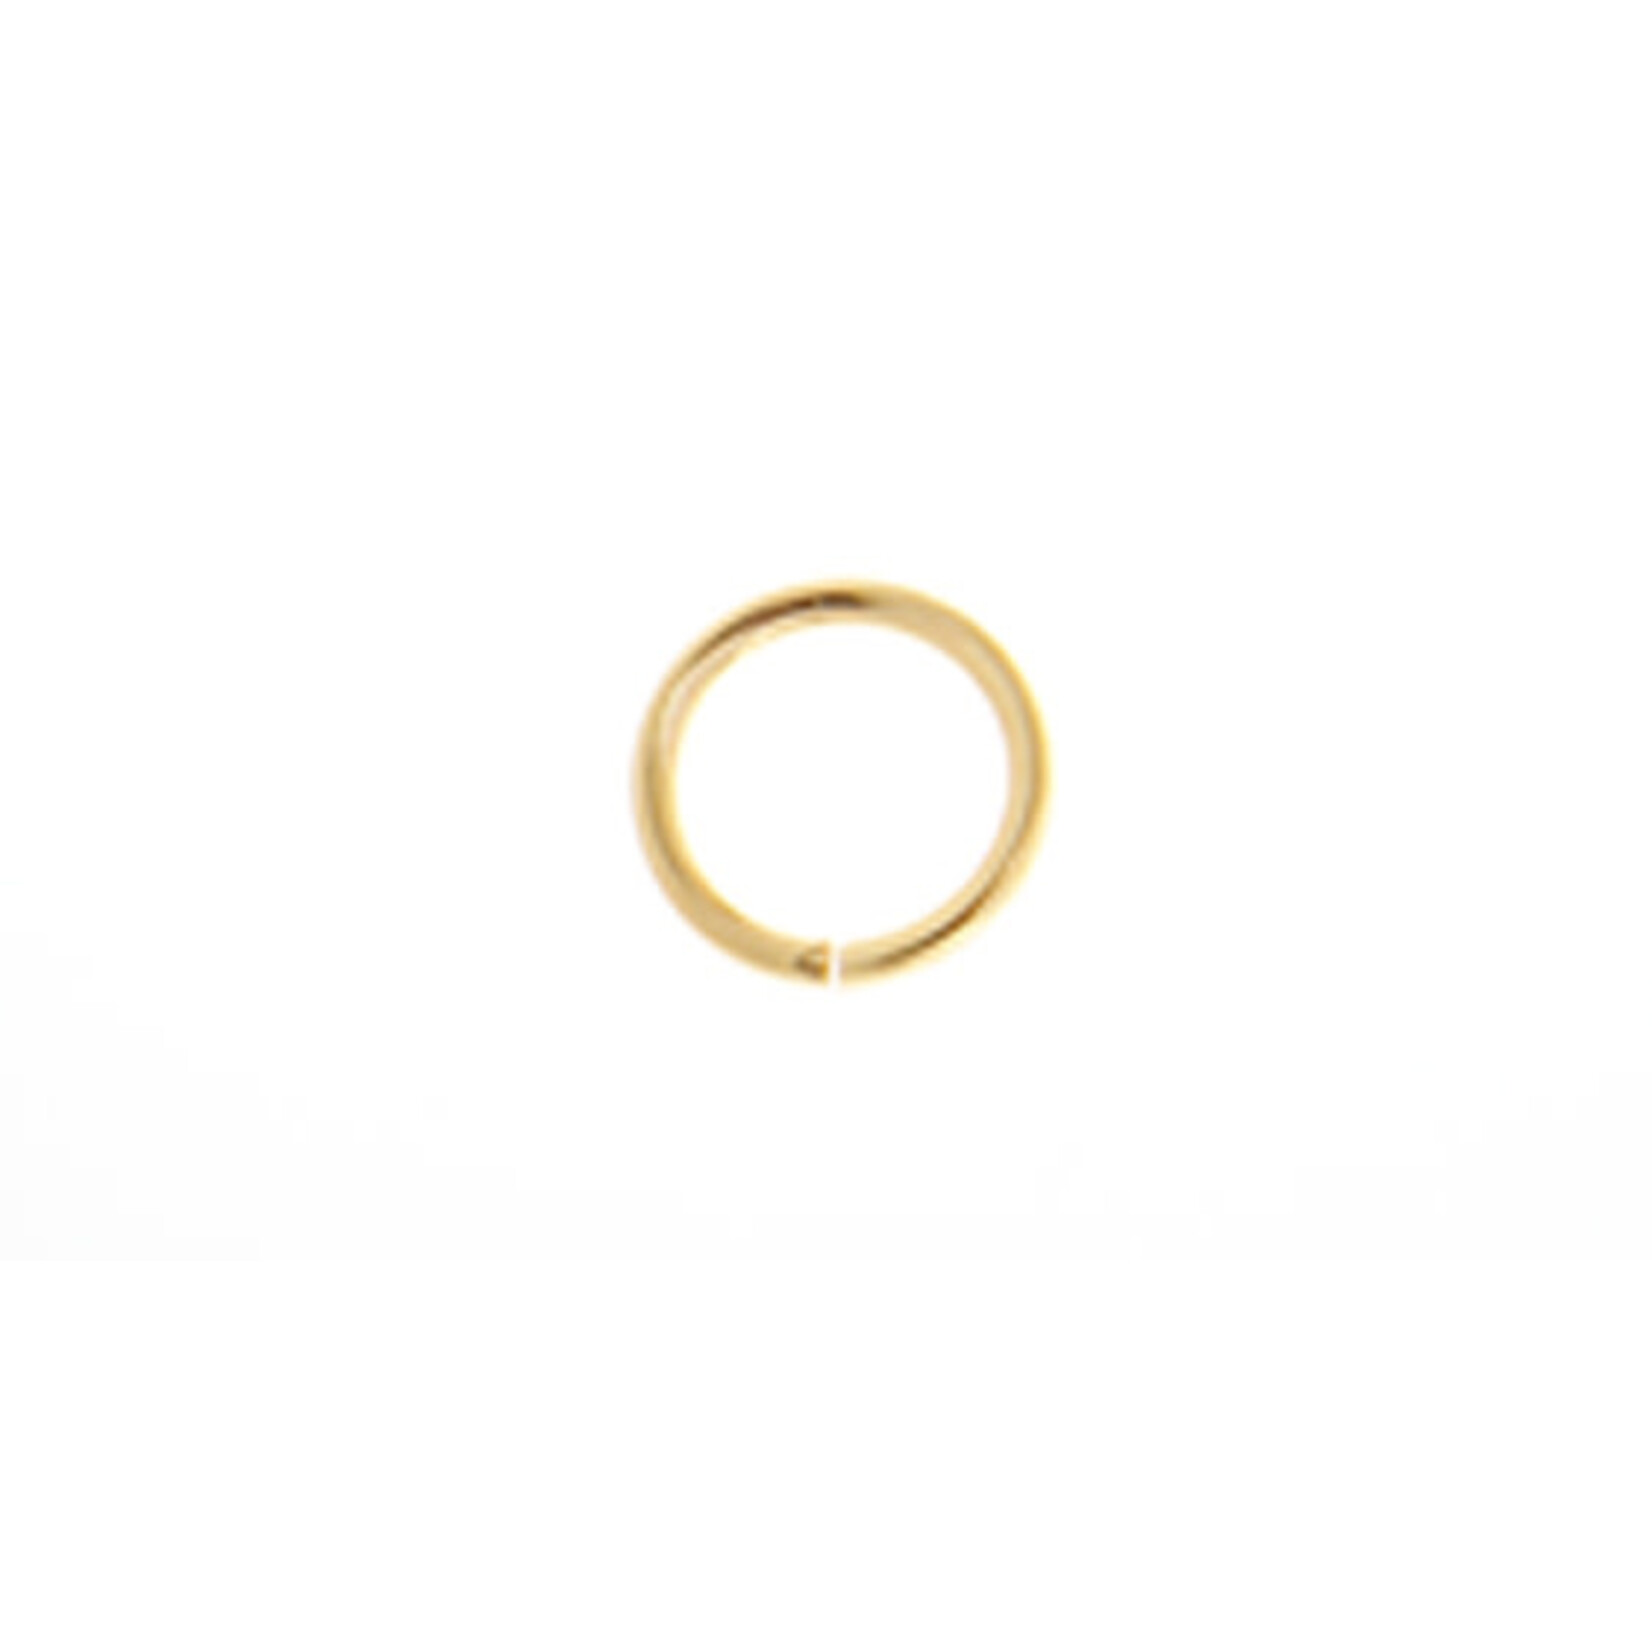 JUMP RINGS - GOLD PLATED - 4MM - 100PK